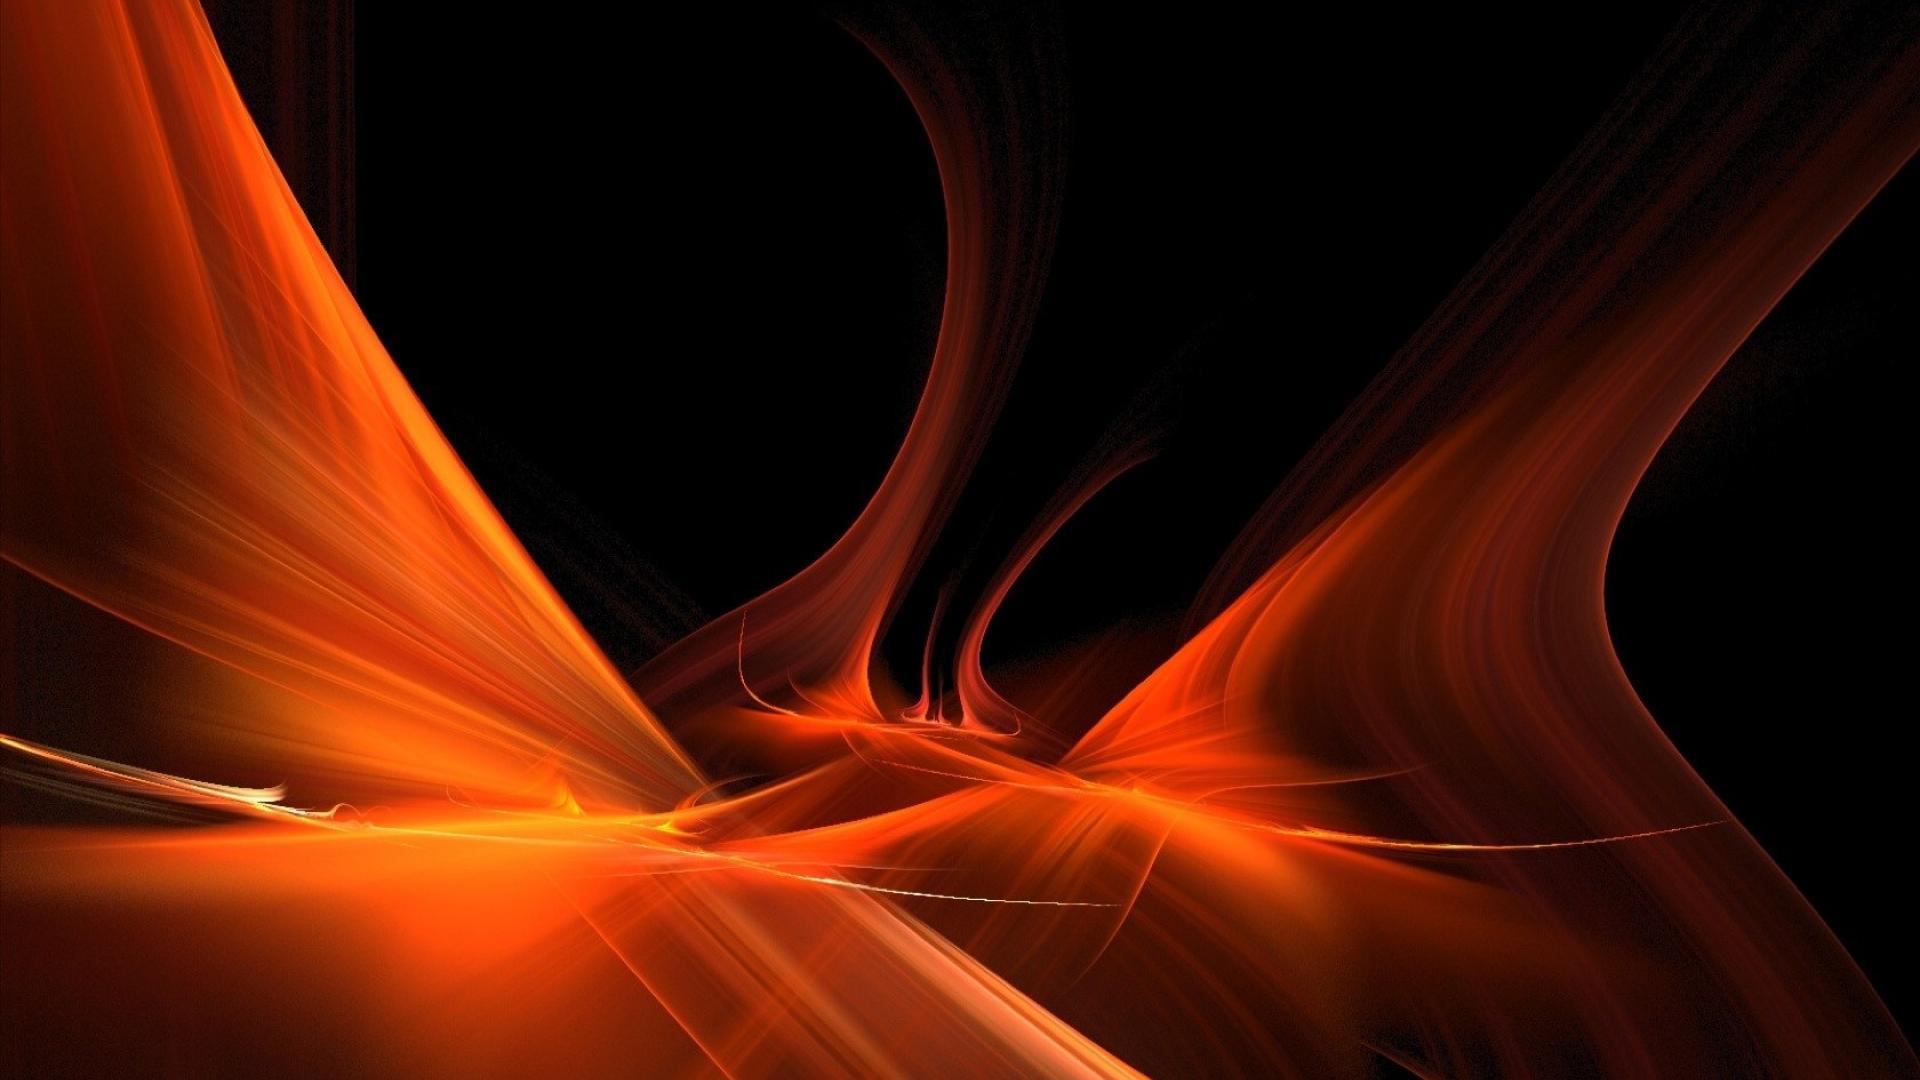 Dark Red Bubbles PPT Background D, Abstract, Black, Orange 1920x1080